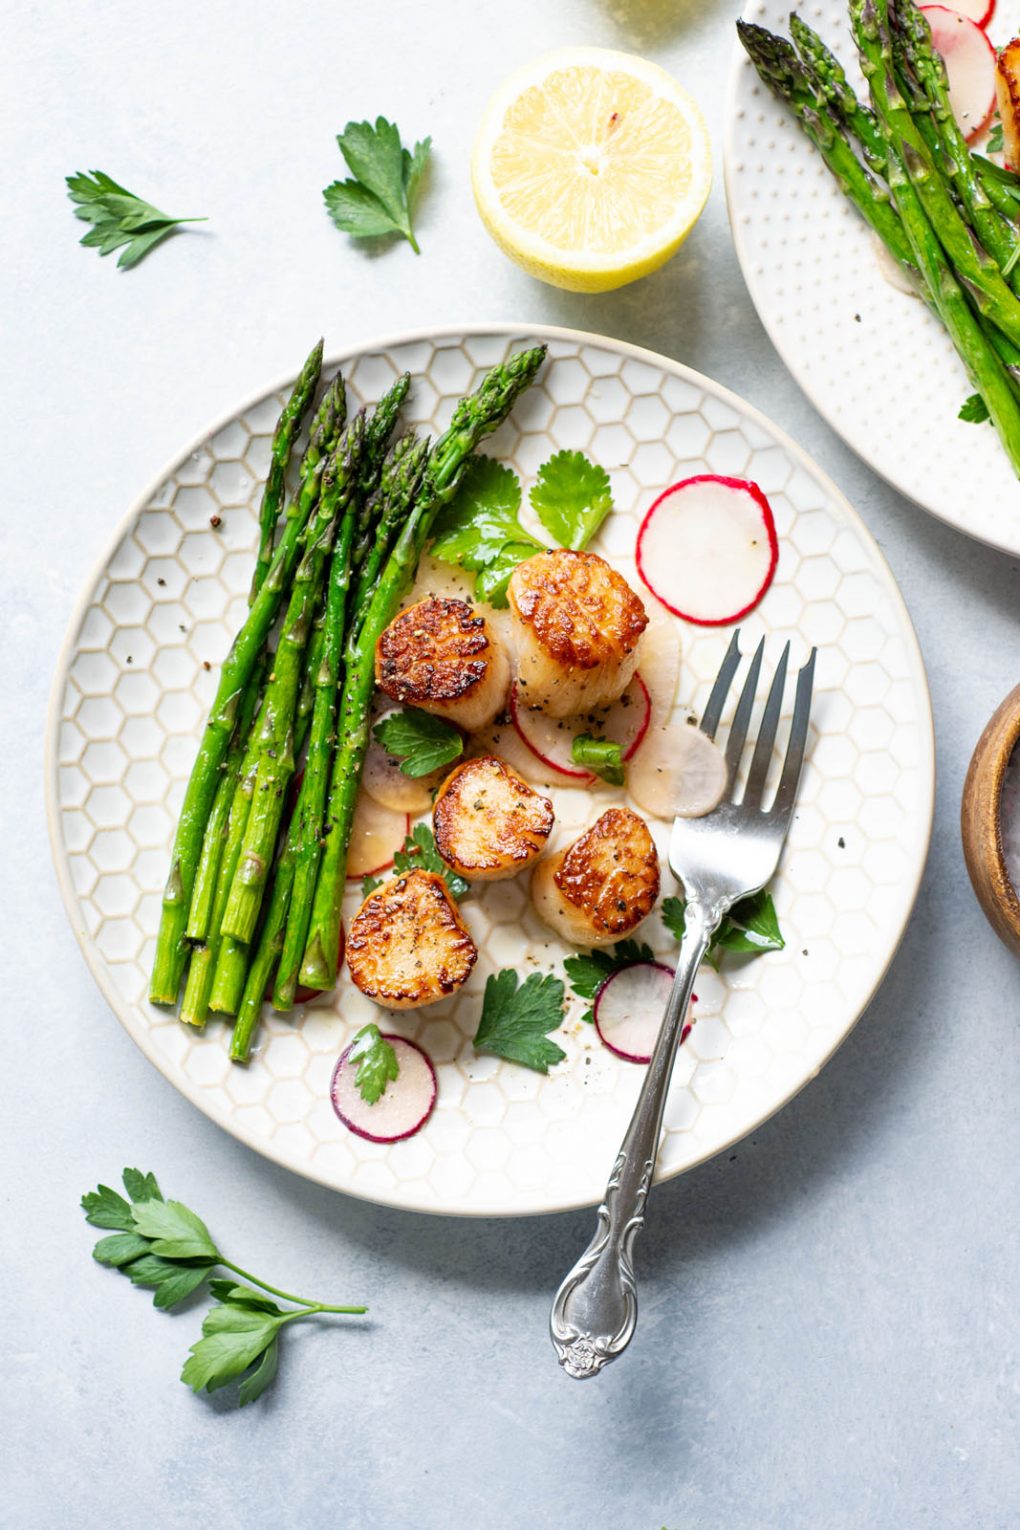 Overhead shot of a white plate with seared scallops over a thinly sliced radish salad, next to a bundle of bright green asparagus with a silver fork on the plate. On a light background surrounded by a cut lemon and a scatter of fresh herbs.